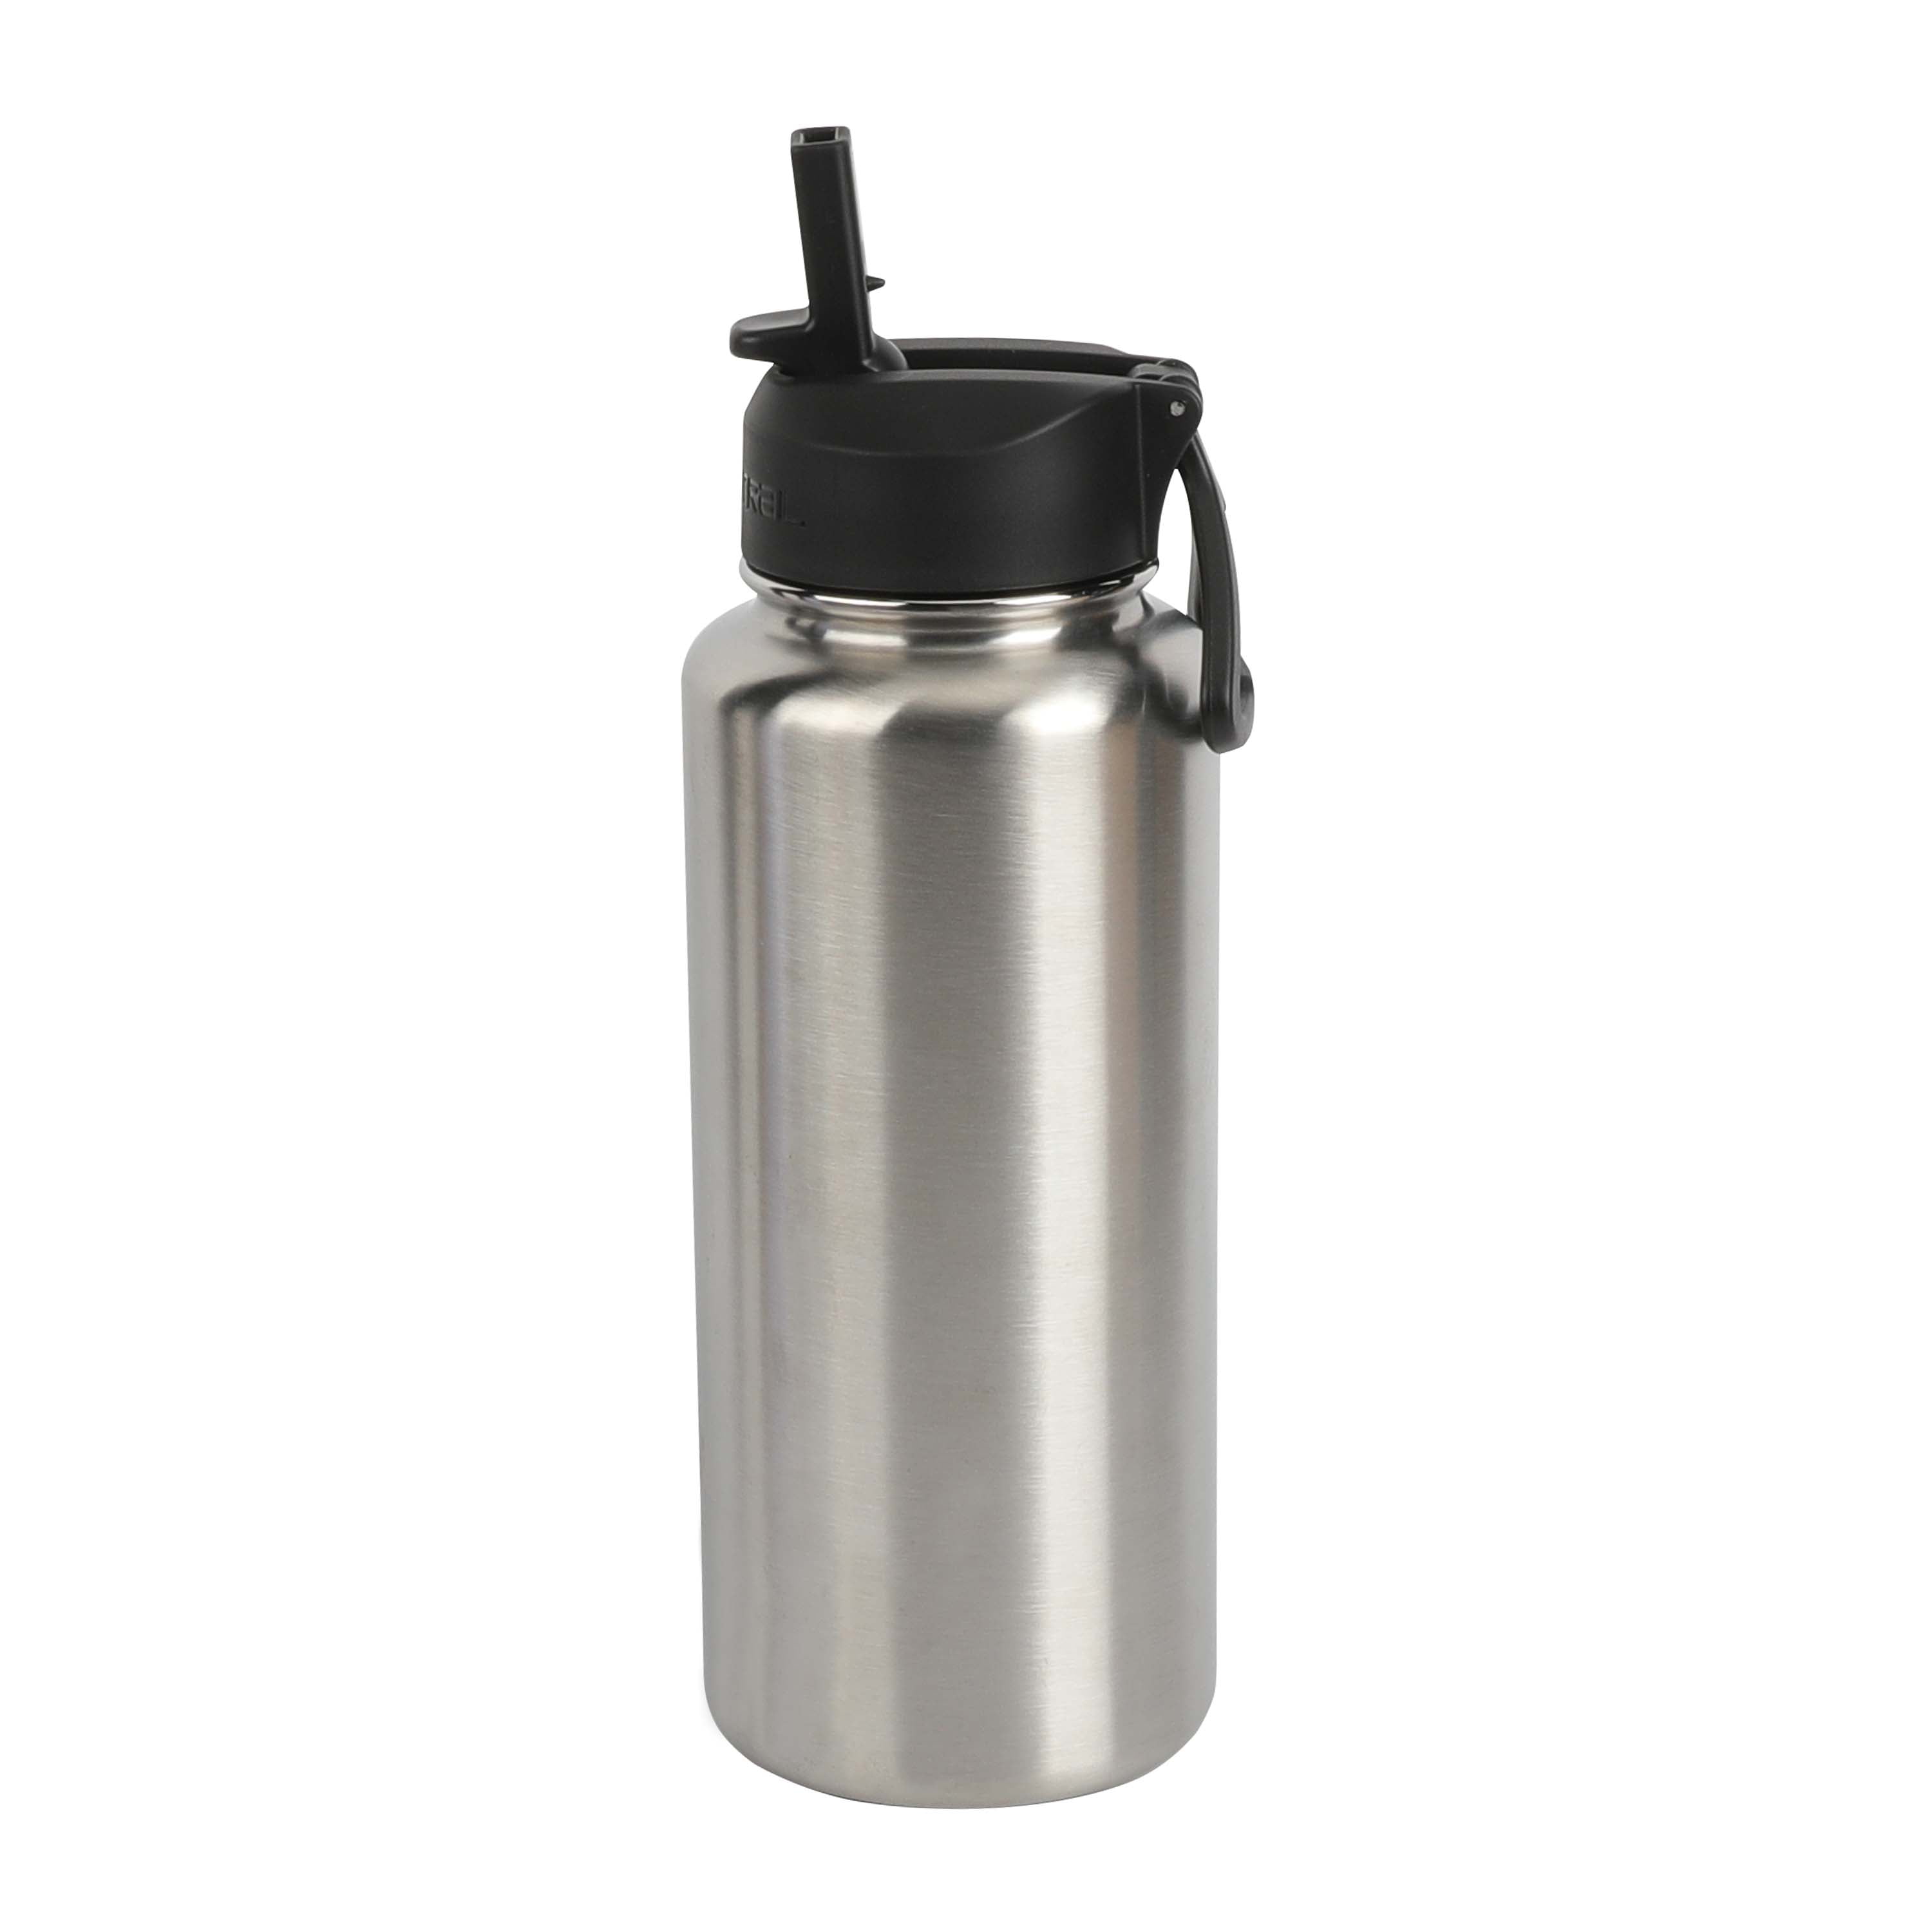 Monochrome Tribal Print - Neutral Stainless Steel Wide Mouth Water Bottle